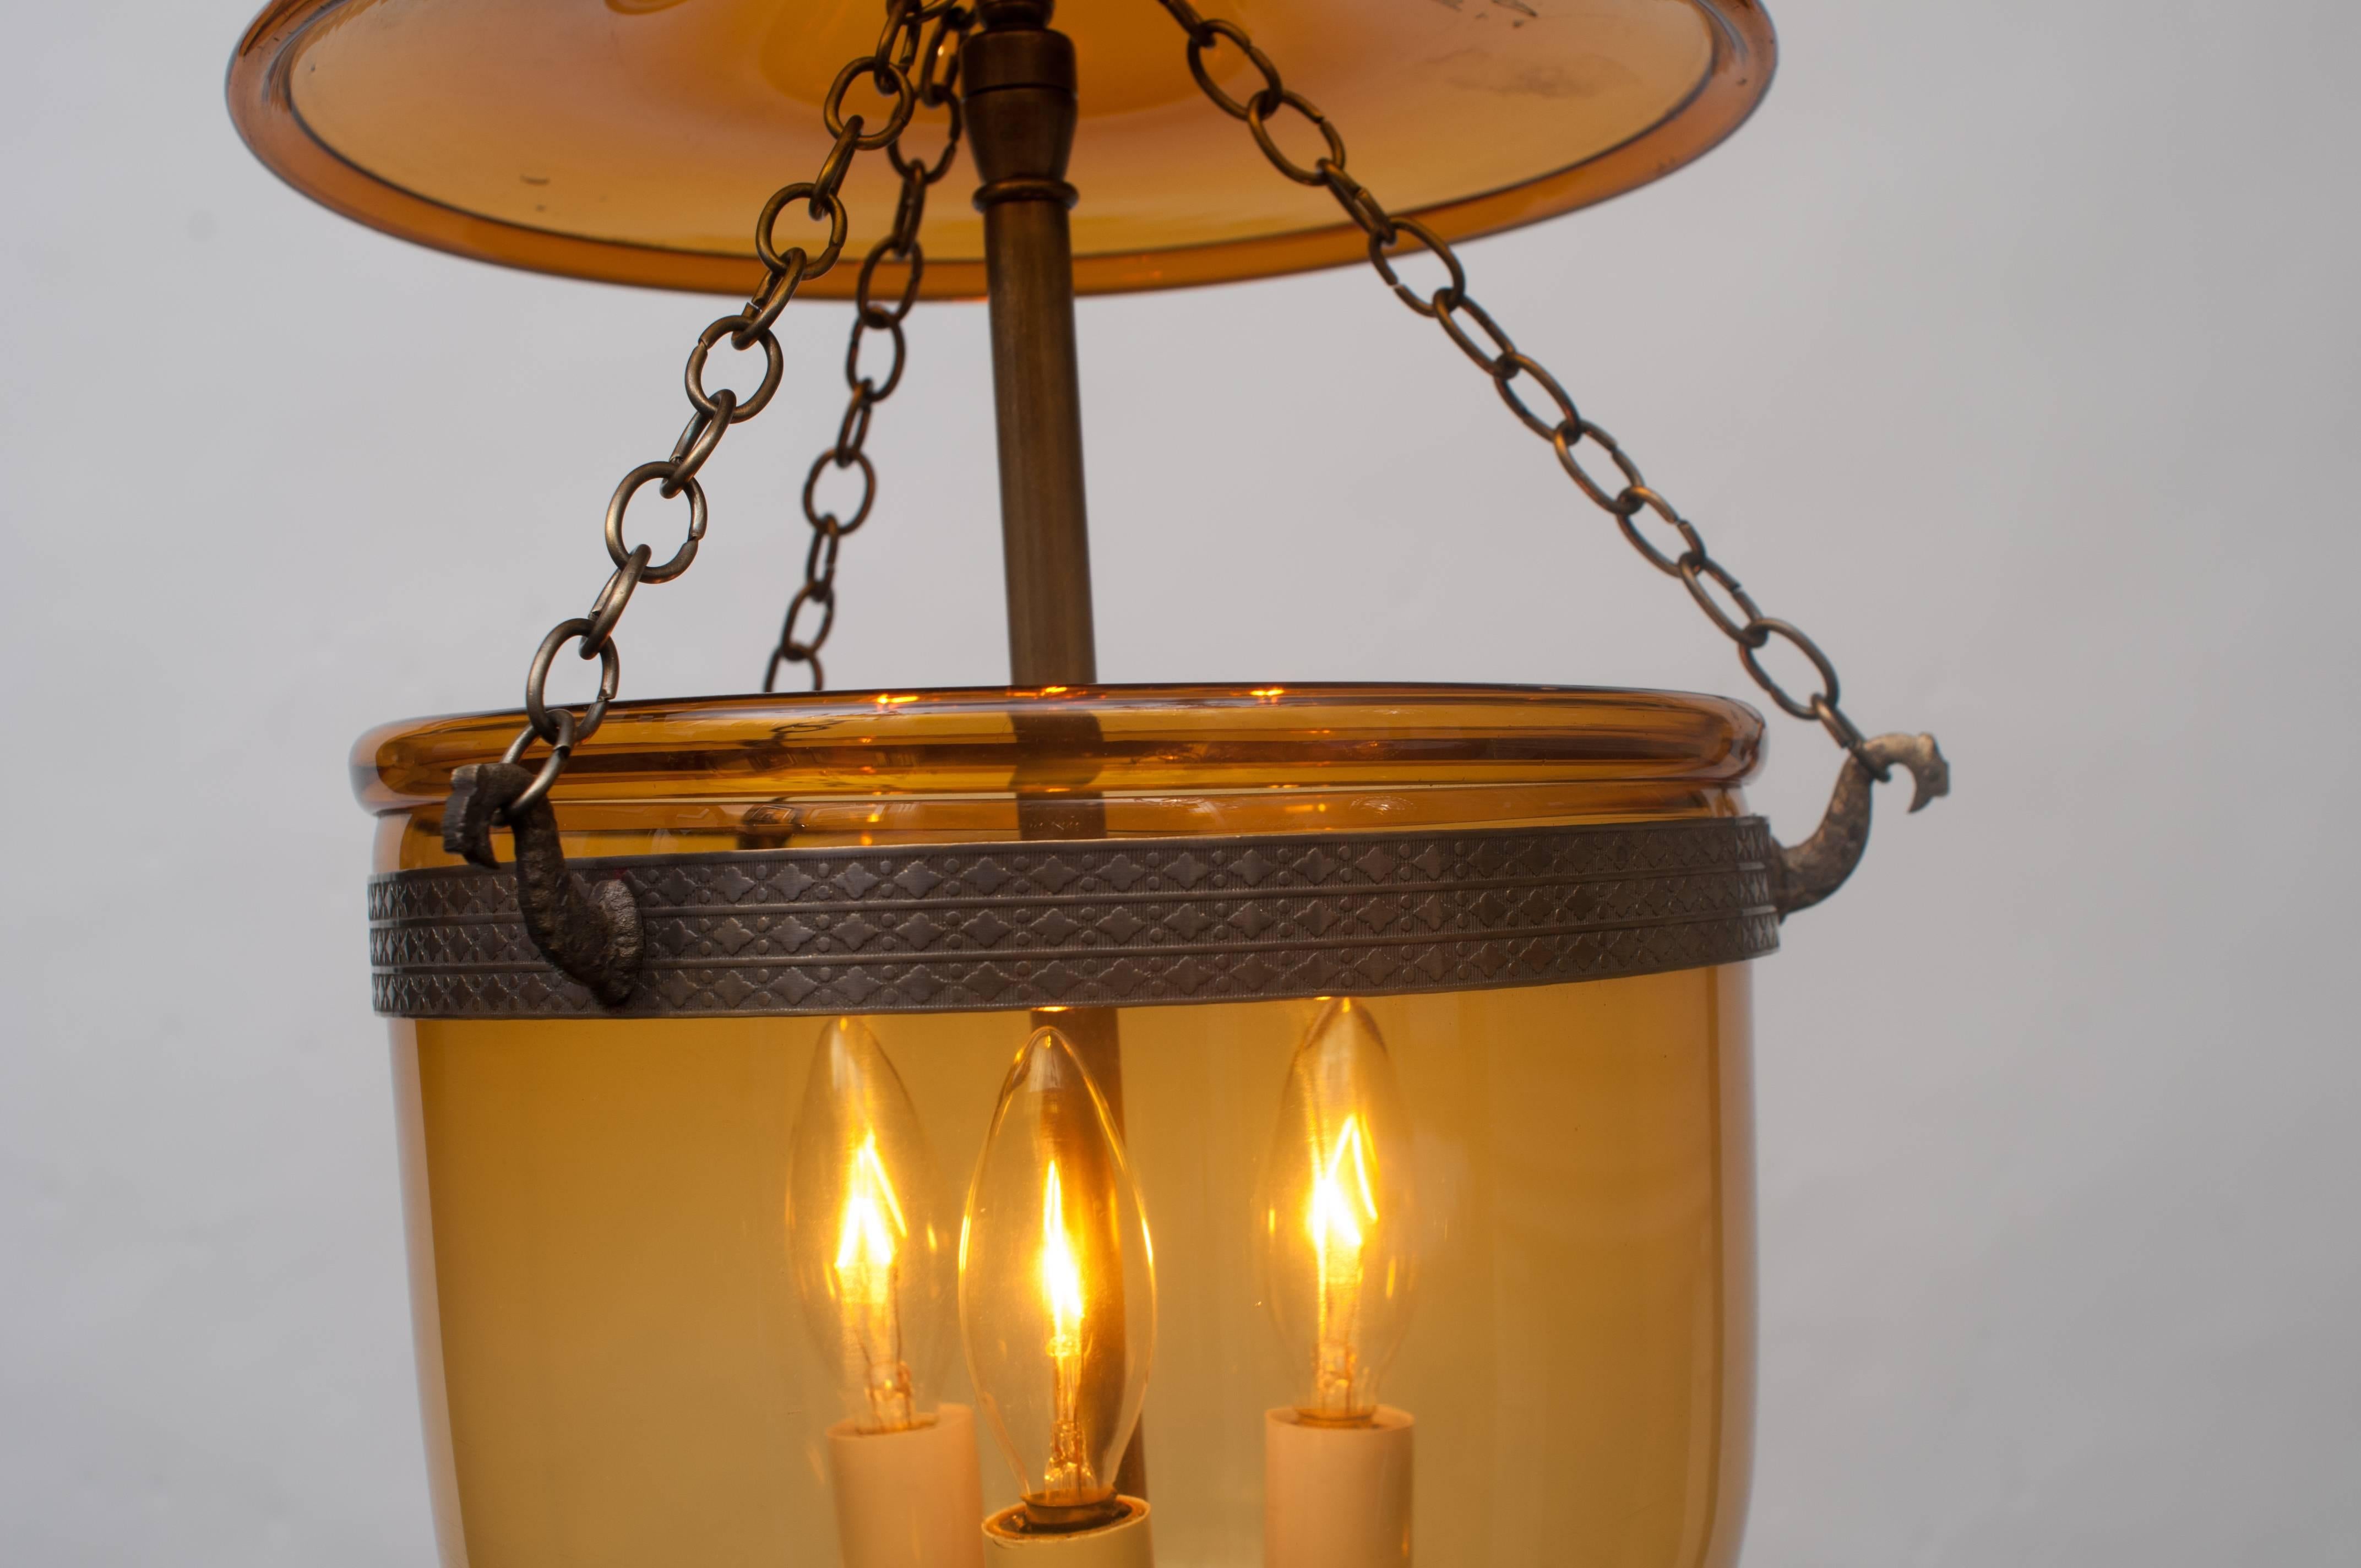 Hand blown glass - plain (no etching) - glass pontil (finial). Original band and smoke bell. Was originally candle or oil-burning, now electrified with new three-light cluster. Height can be adjusted. Ceiling cap, chain, and hanging hardware